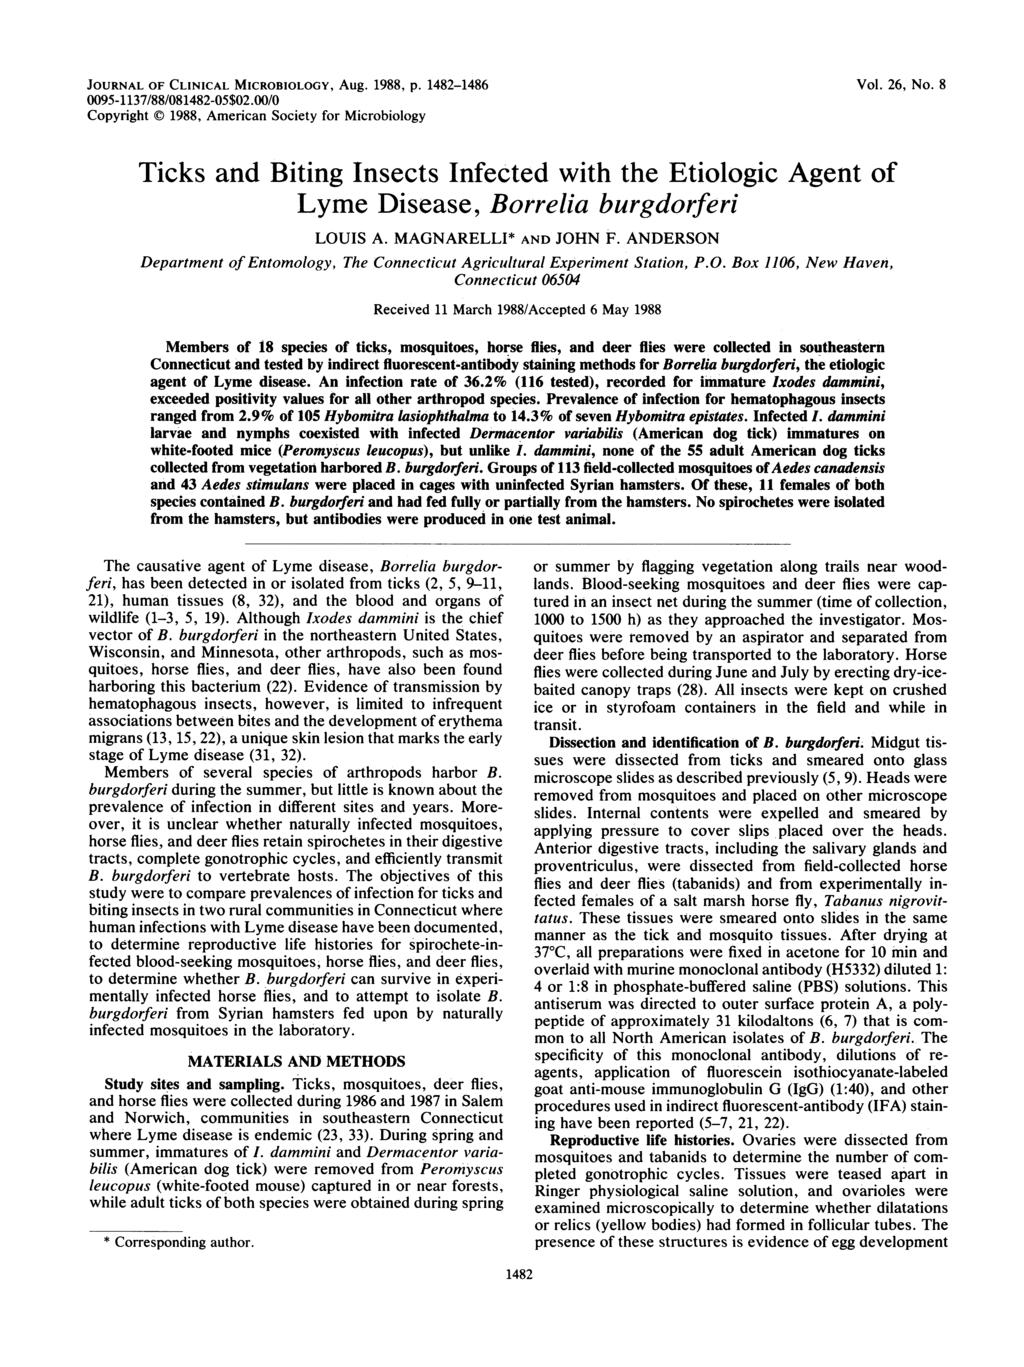 JOURNAL OF CLINICAL MICROBIOLOGY, Aug. 1988, p. 1482-1486 0095-1137/88/081482-05$02.00/0 Copyright 1988, American Society for Microbiology Vol. 26, No.